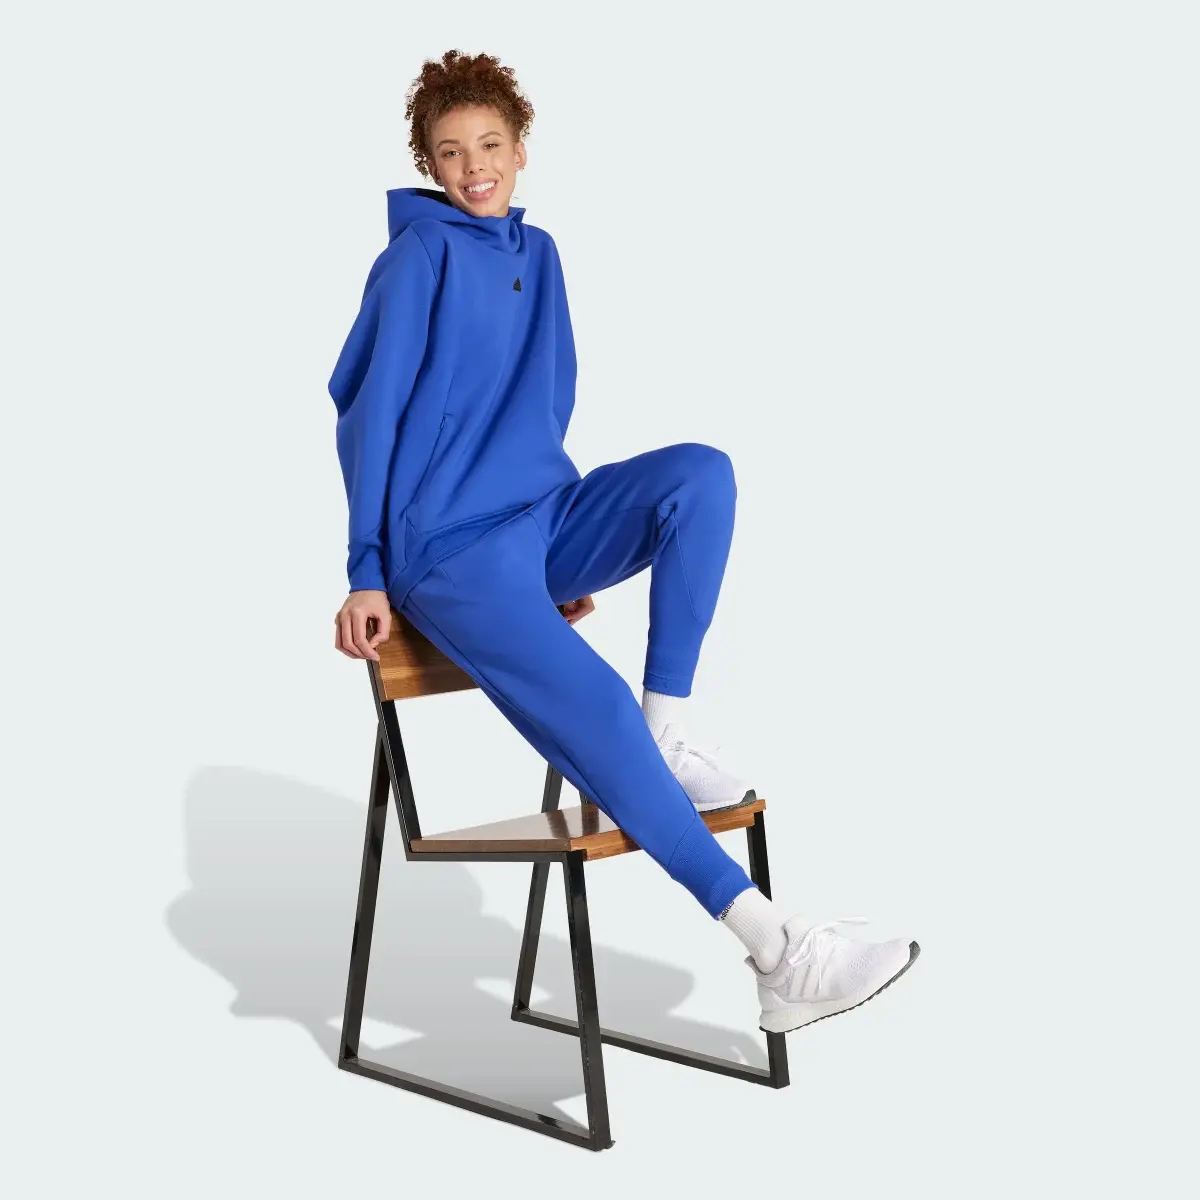 Adidas Z.N.E. Tracksuit Bottoms. 3